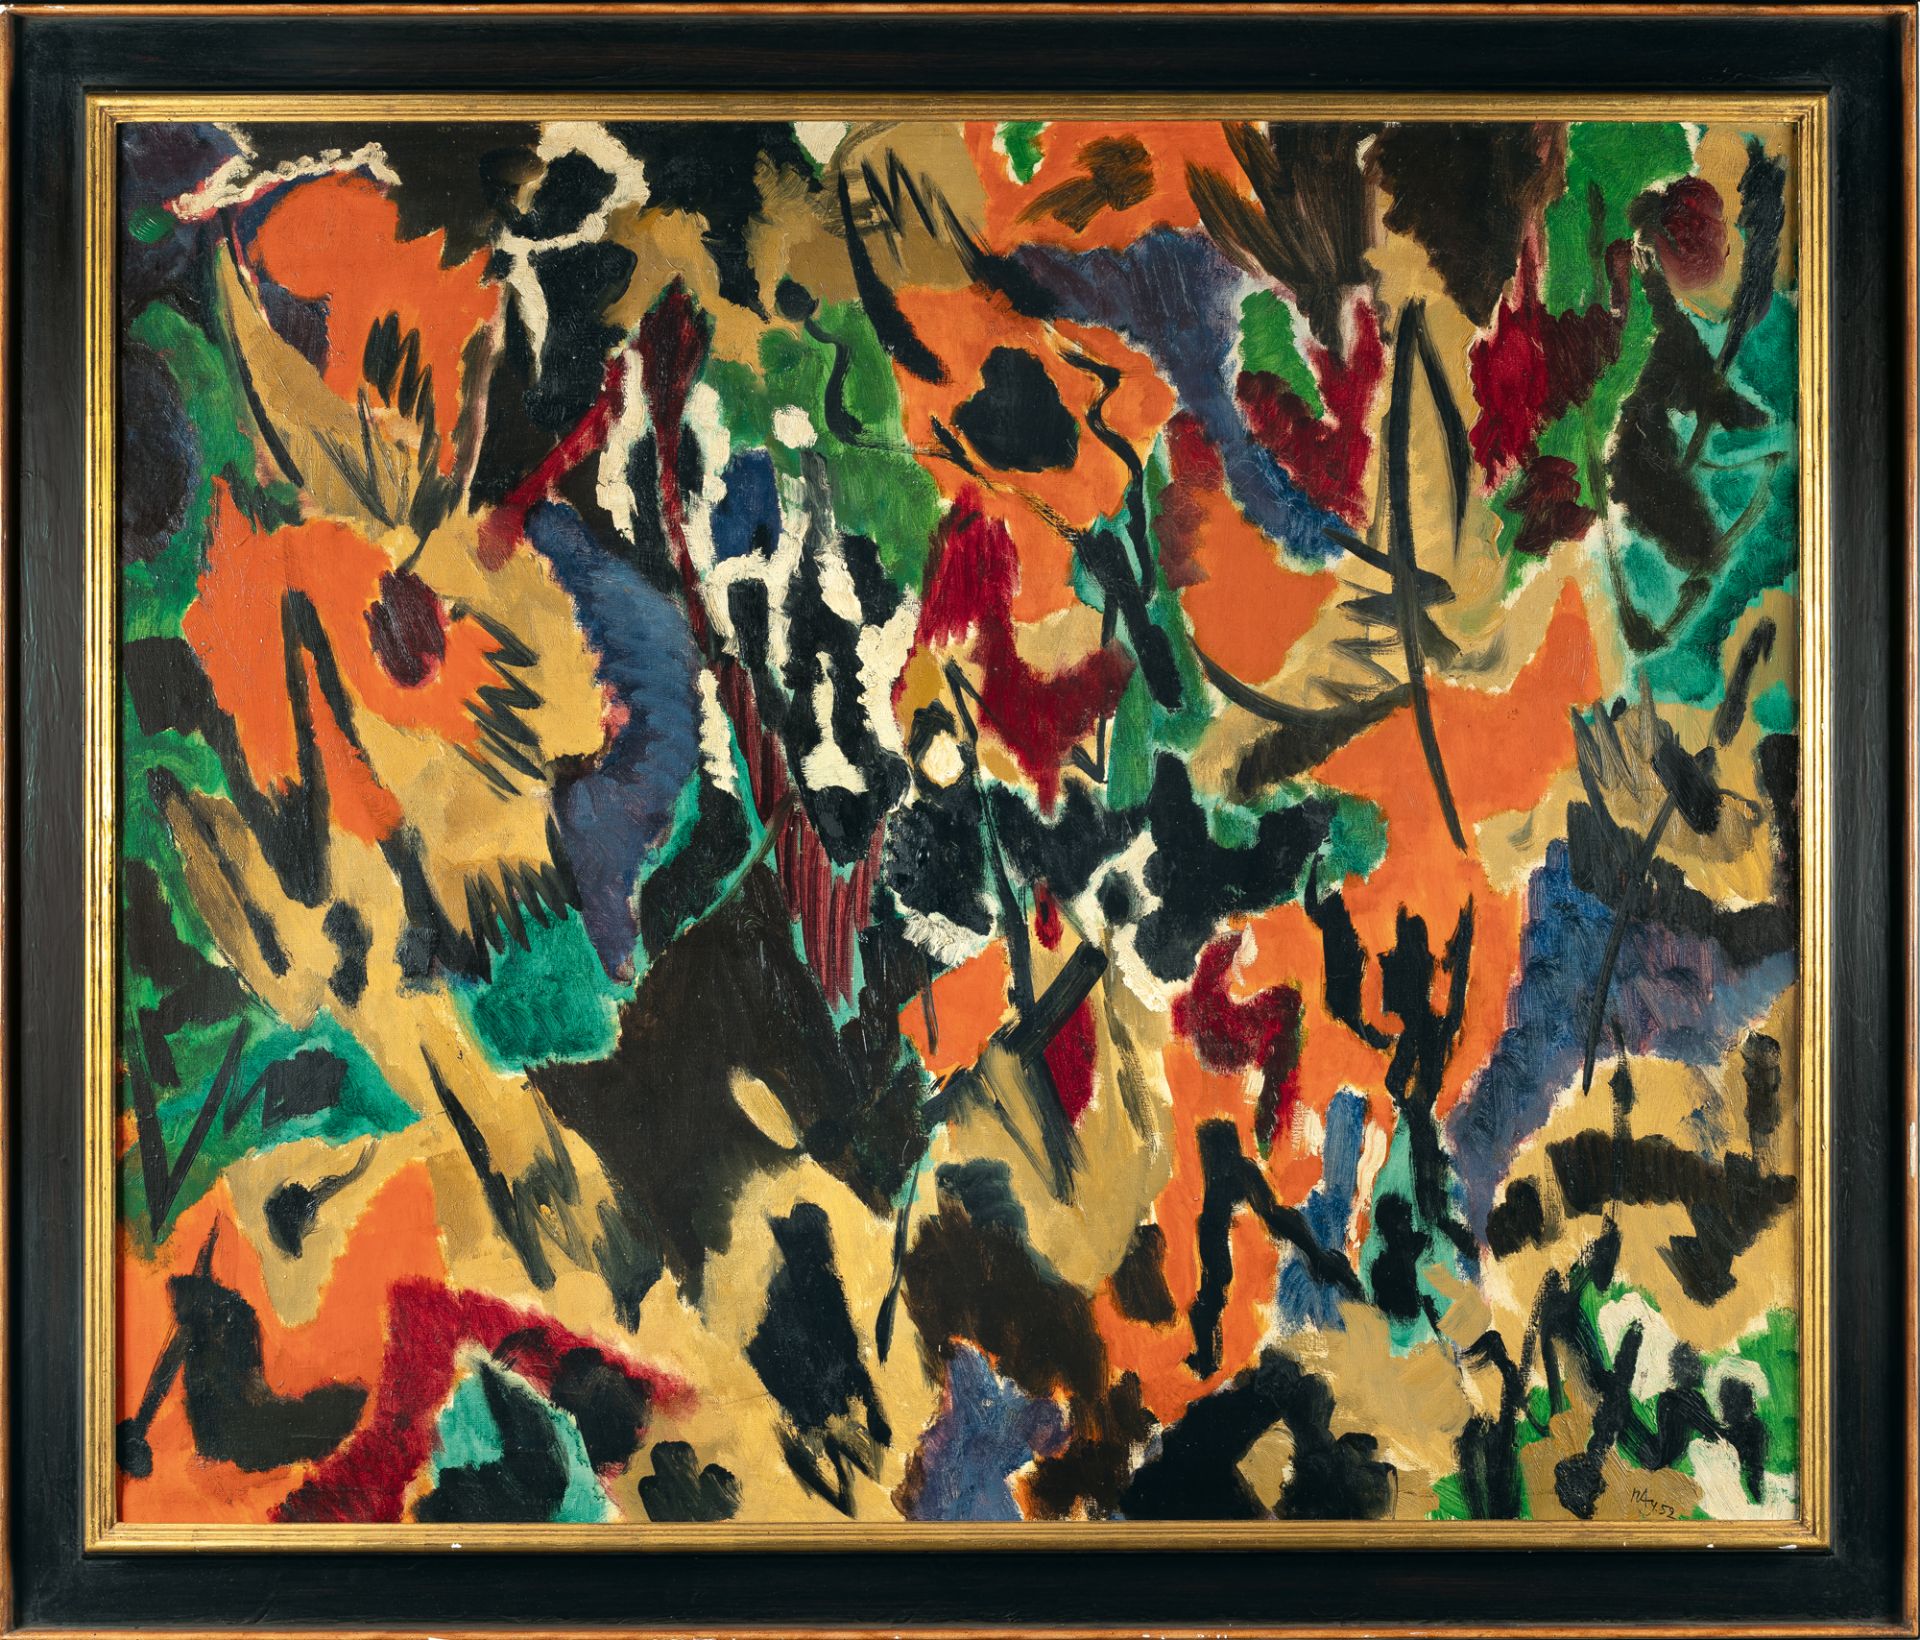 Ernst Wilhelm Nay, Orange mercurial.Oil on canvas. (19)52. Ca. 100 x 119.5 cm. Signed and dated - Image 2 of 4